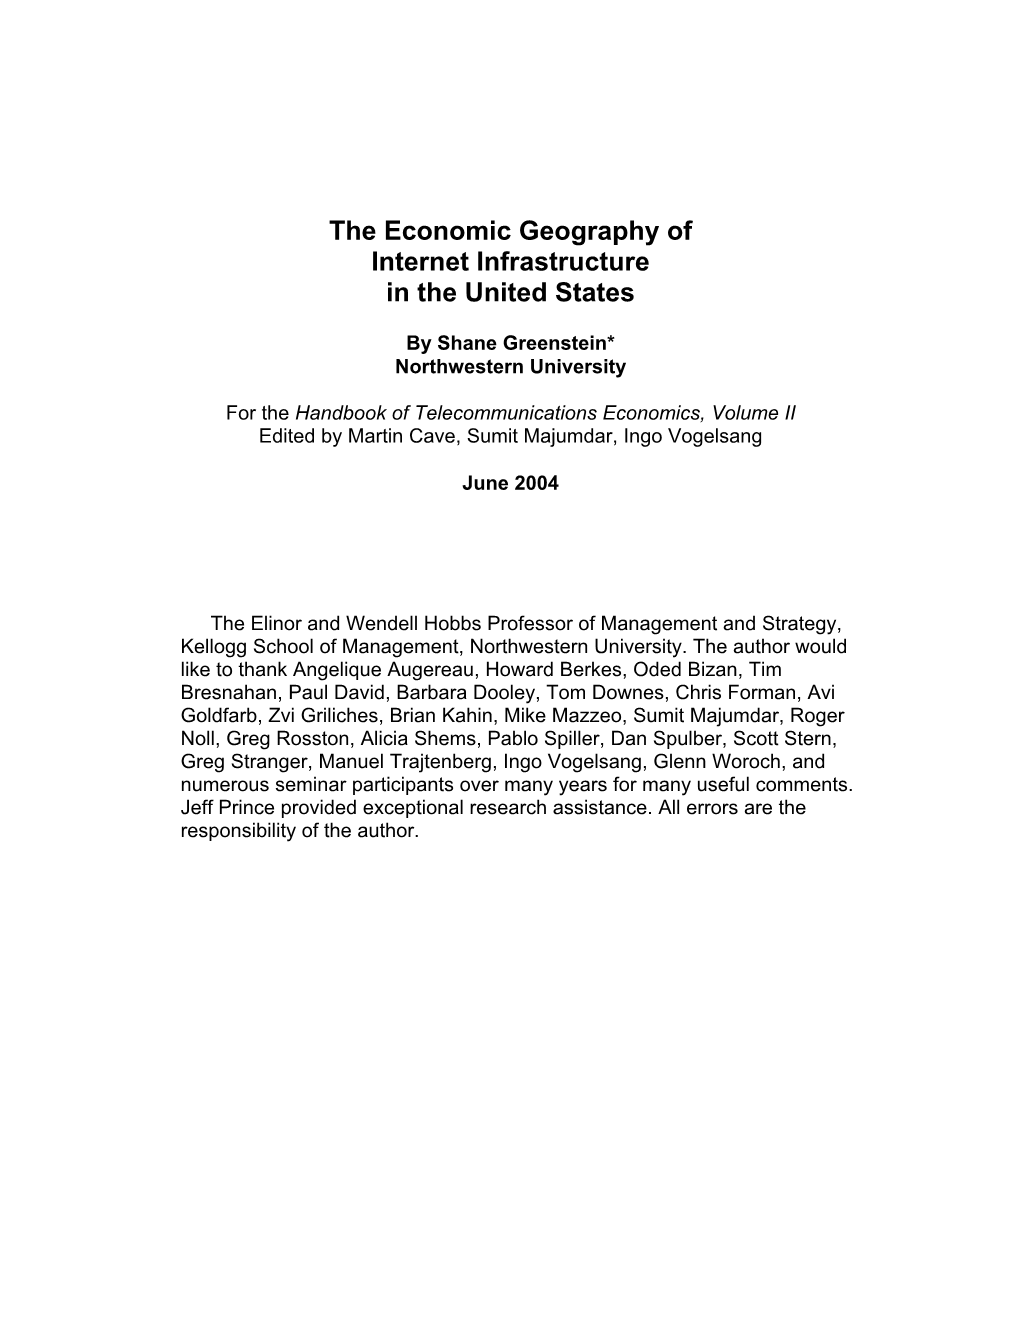 The Economic Geography of Internet Infrastructure in the United States